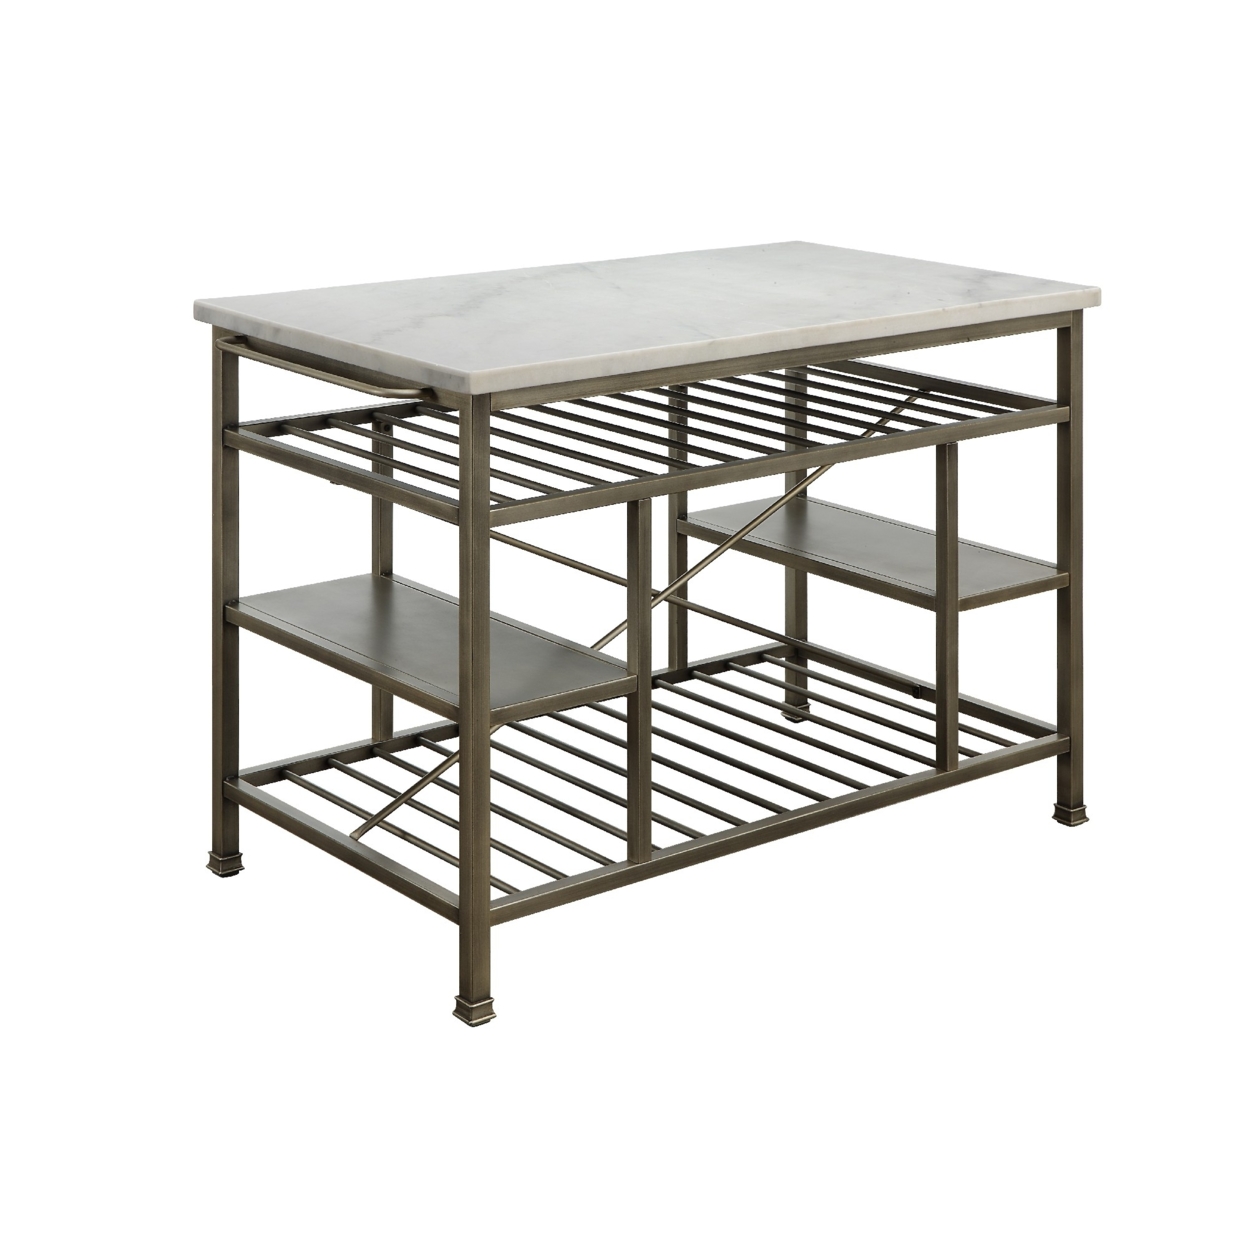 Marble Top Metal Kitchen Island With 2 Slated Shelves, Gray And White- Saltoro Sherpi